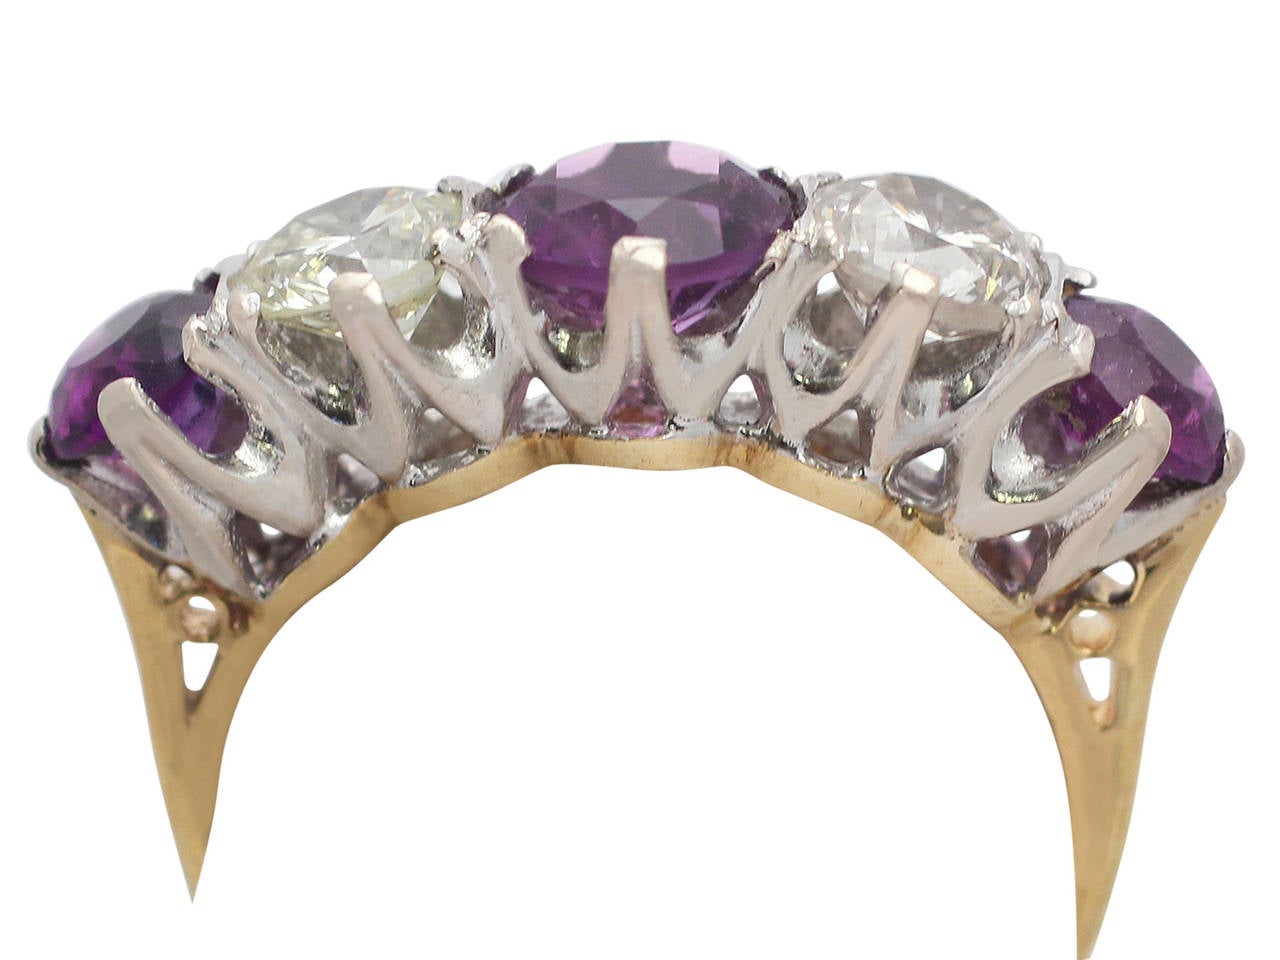 A fine antique 1.30 carat amethyst and 0.84 carat diamond, 18 karat yellow gold, platinum set cocktail ring; part of our antique jewelry and estate jewelry collections

This fine antique amethyst cocktail ring has been crafted in 18k yellow gold